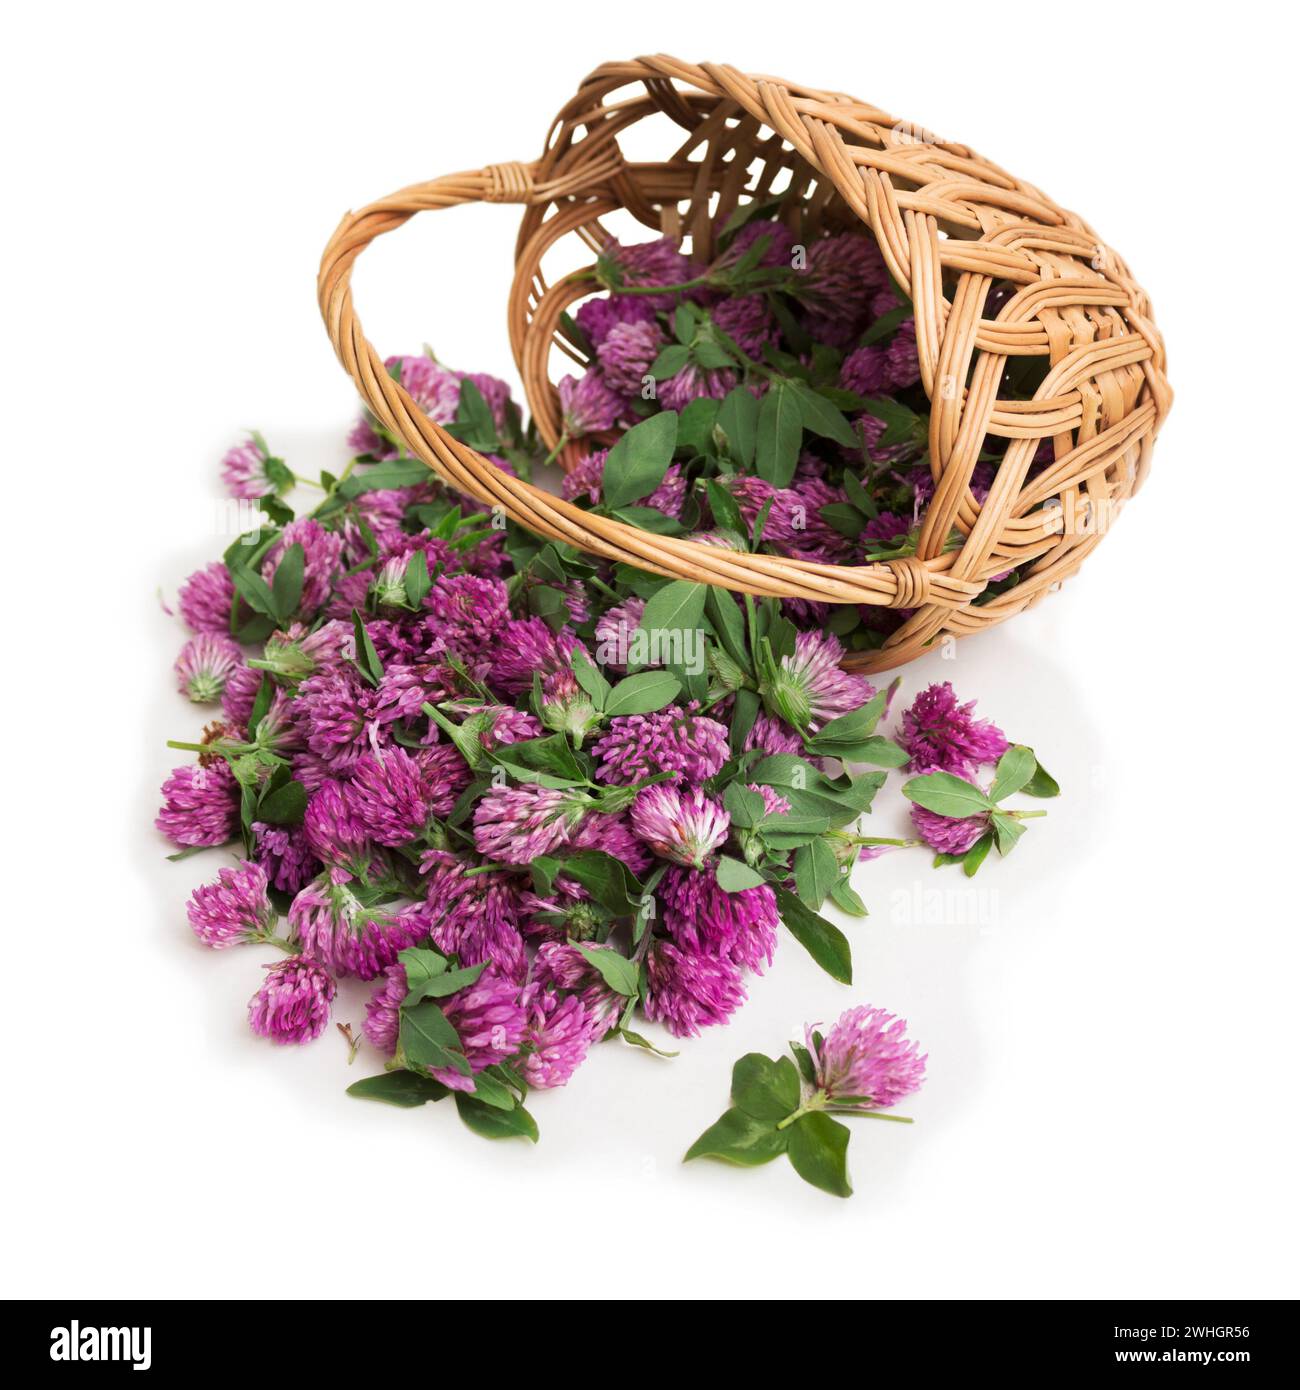 Wicker basket with clover flowers isolated on white. Herbal Medicine Stock Photo